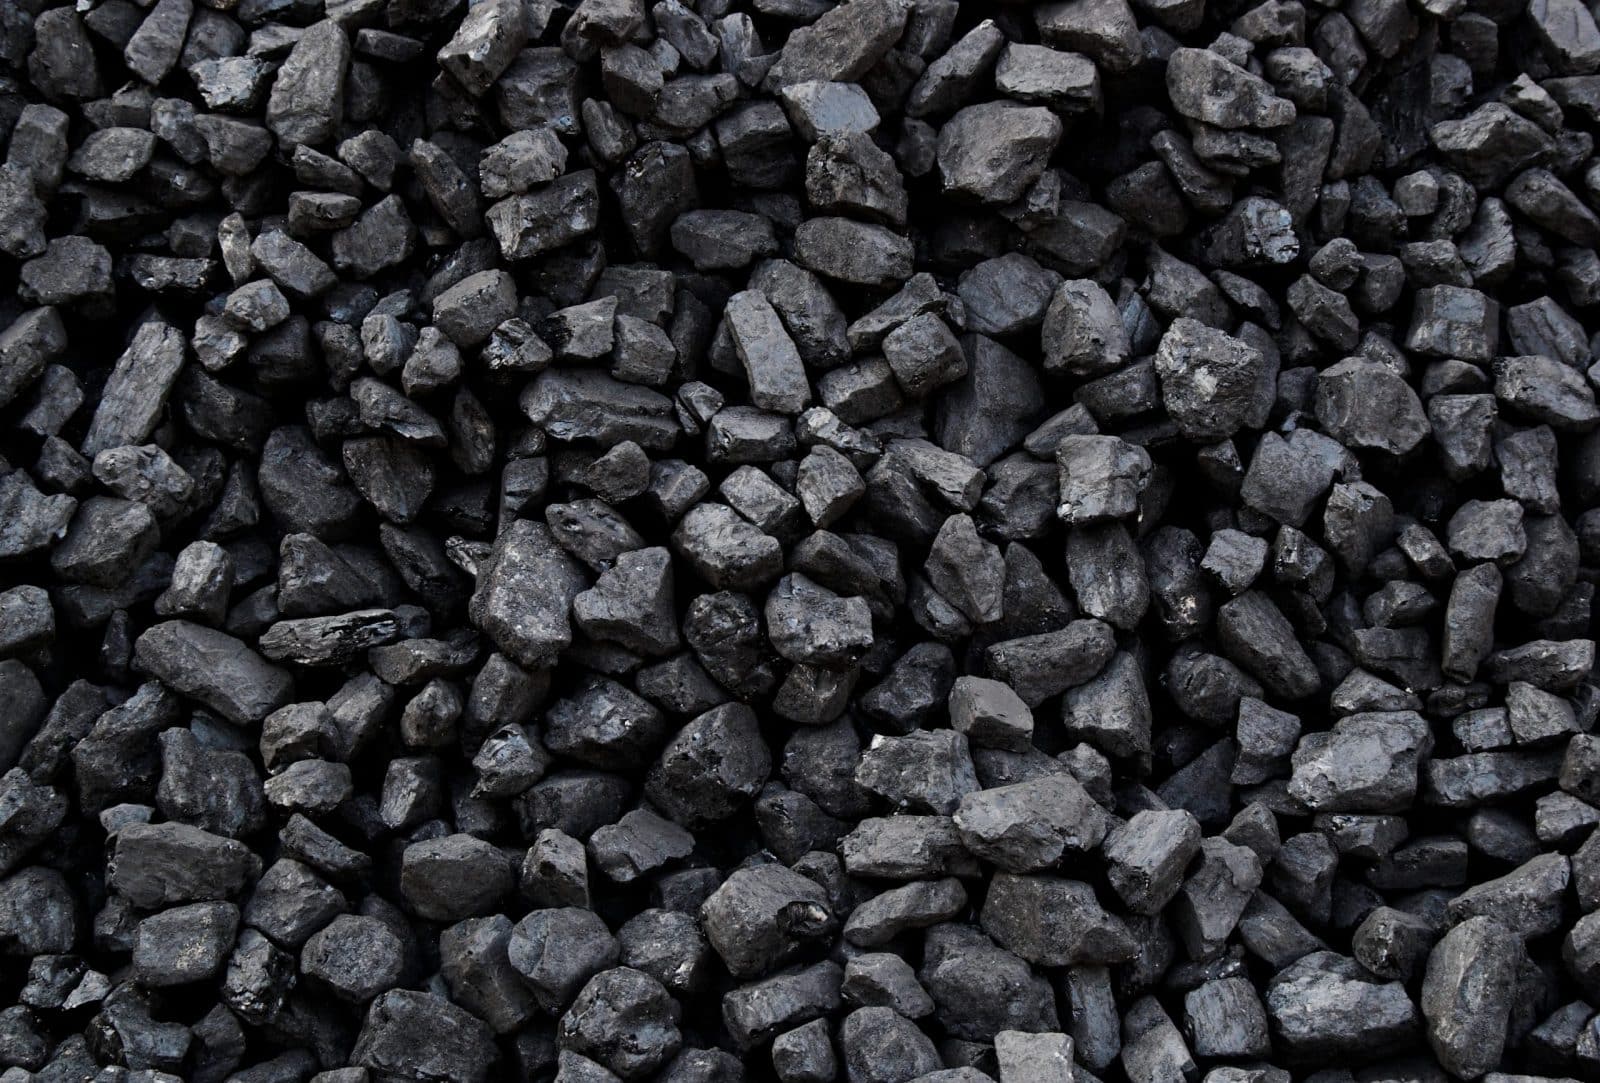 Polish President signed a decree imposing embargo on coal imports from Russia and Belarus